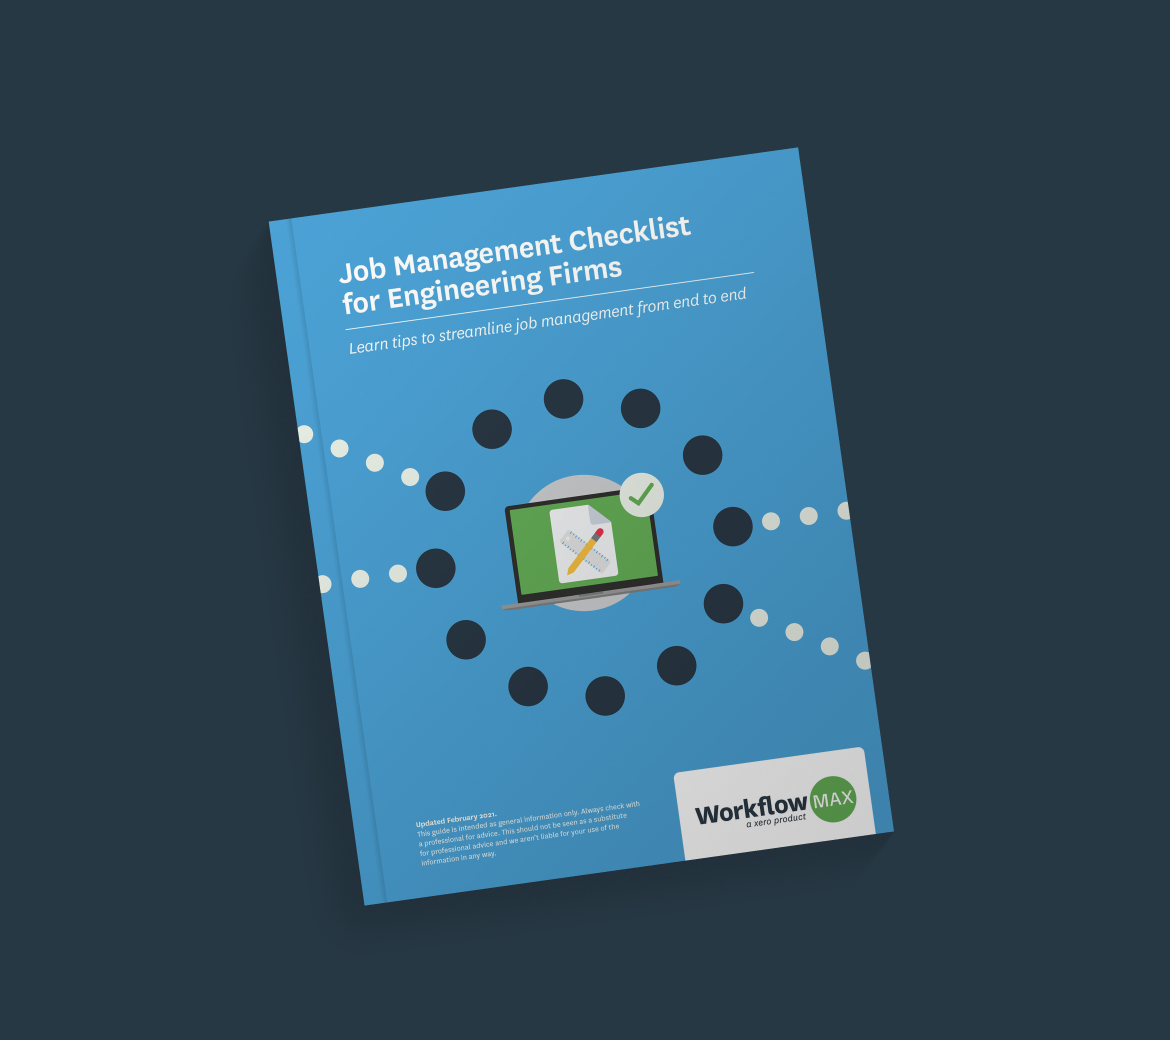 Free download: Job Management Checklist for Engineering Firms